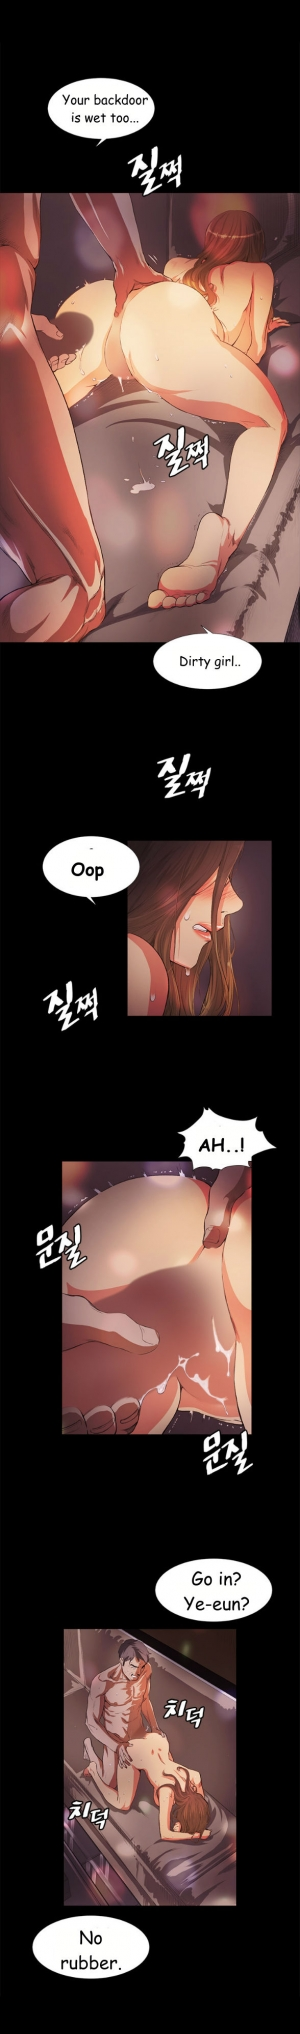  By Chance (Ep. 1-30)  [English] - Page 259